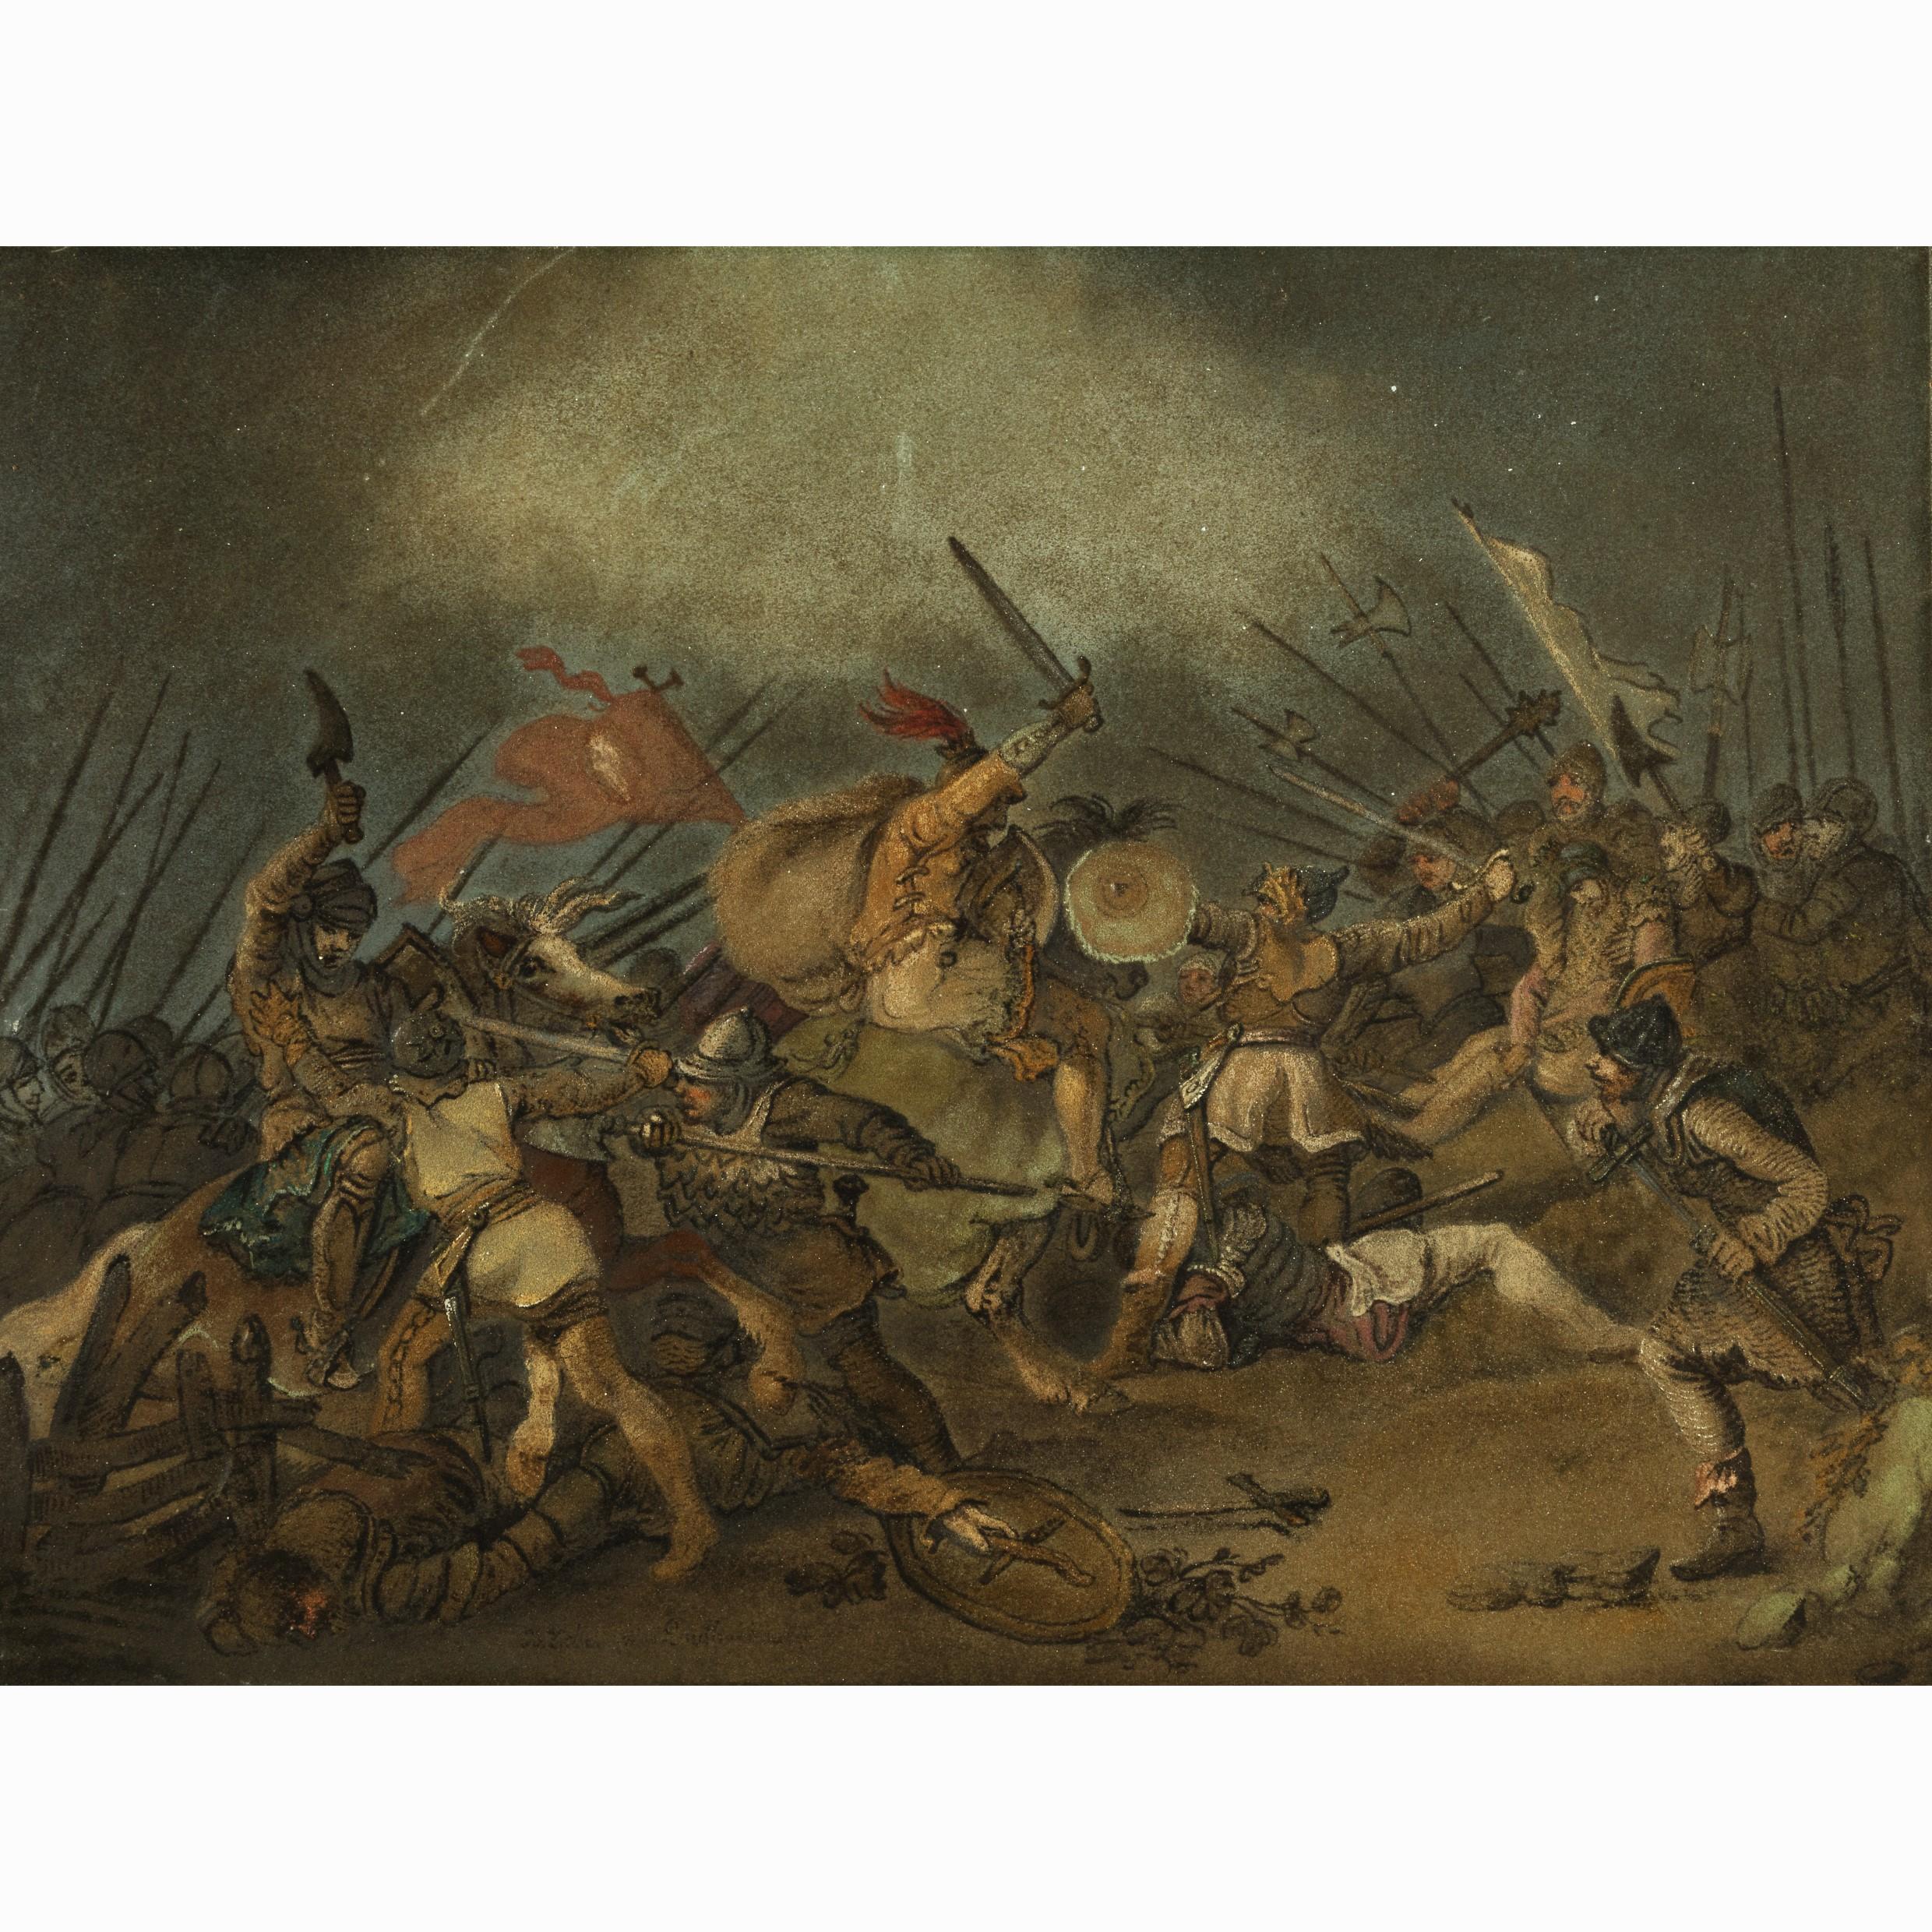 These extraordinary ‘paintings’ were created using coloured grains of sand rather than paints. Each is after an original painting by Philip James de Loutherbourg. The first scene shows the Battle of Hastings with a central mounted figure, presumably